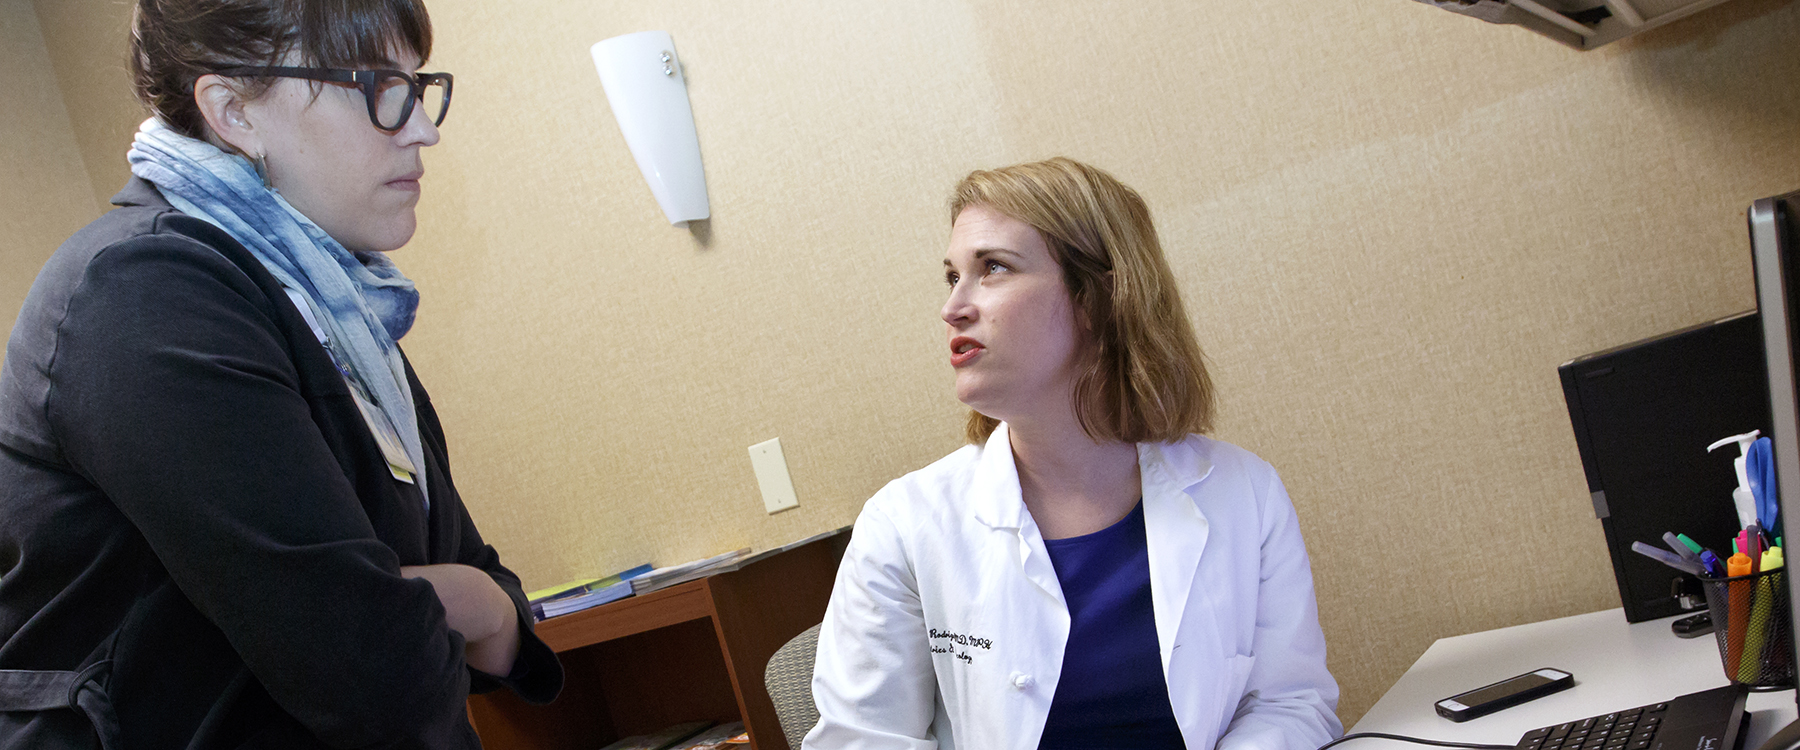 Dr. Maria Rodriguez, right, consults with resident Britta Ameel about Ameel's research